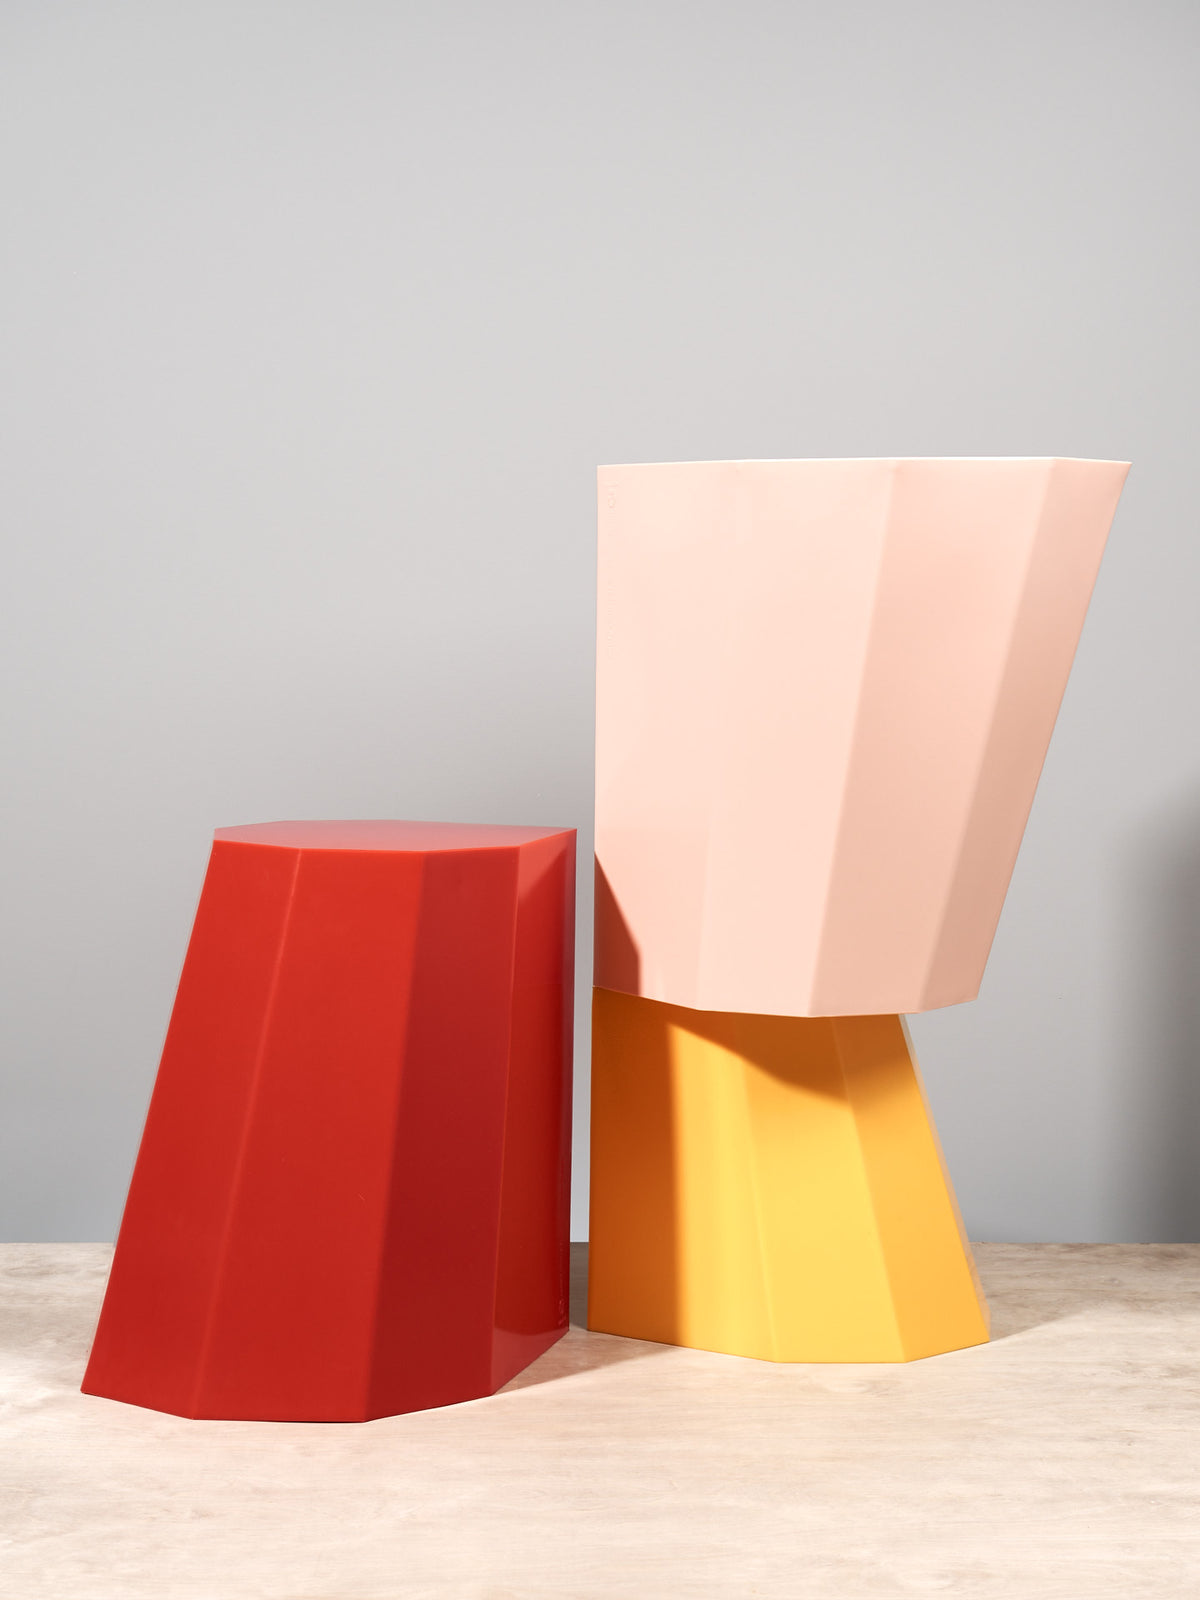 A pair of colorful Arnoldino Stools – Red by Martino Gamper on a wooden table.